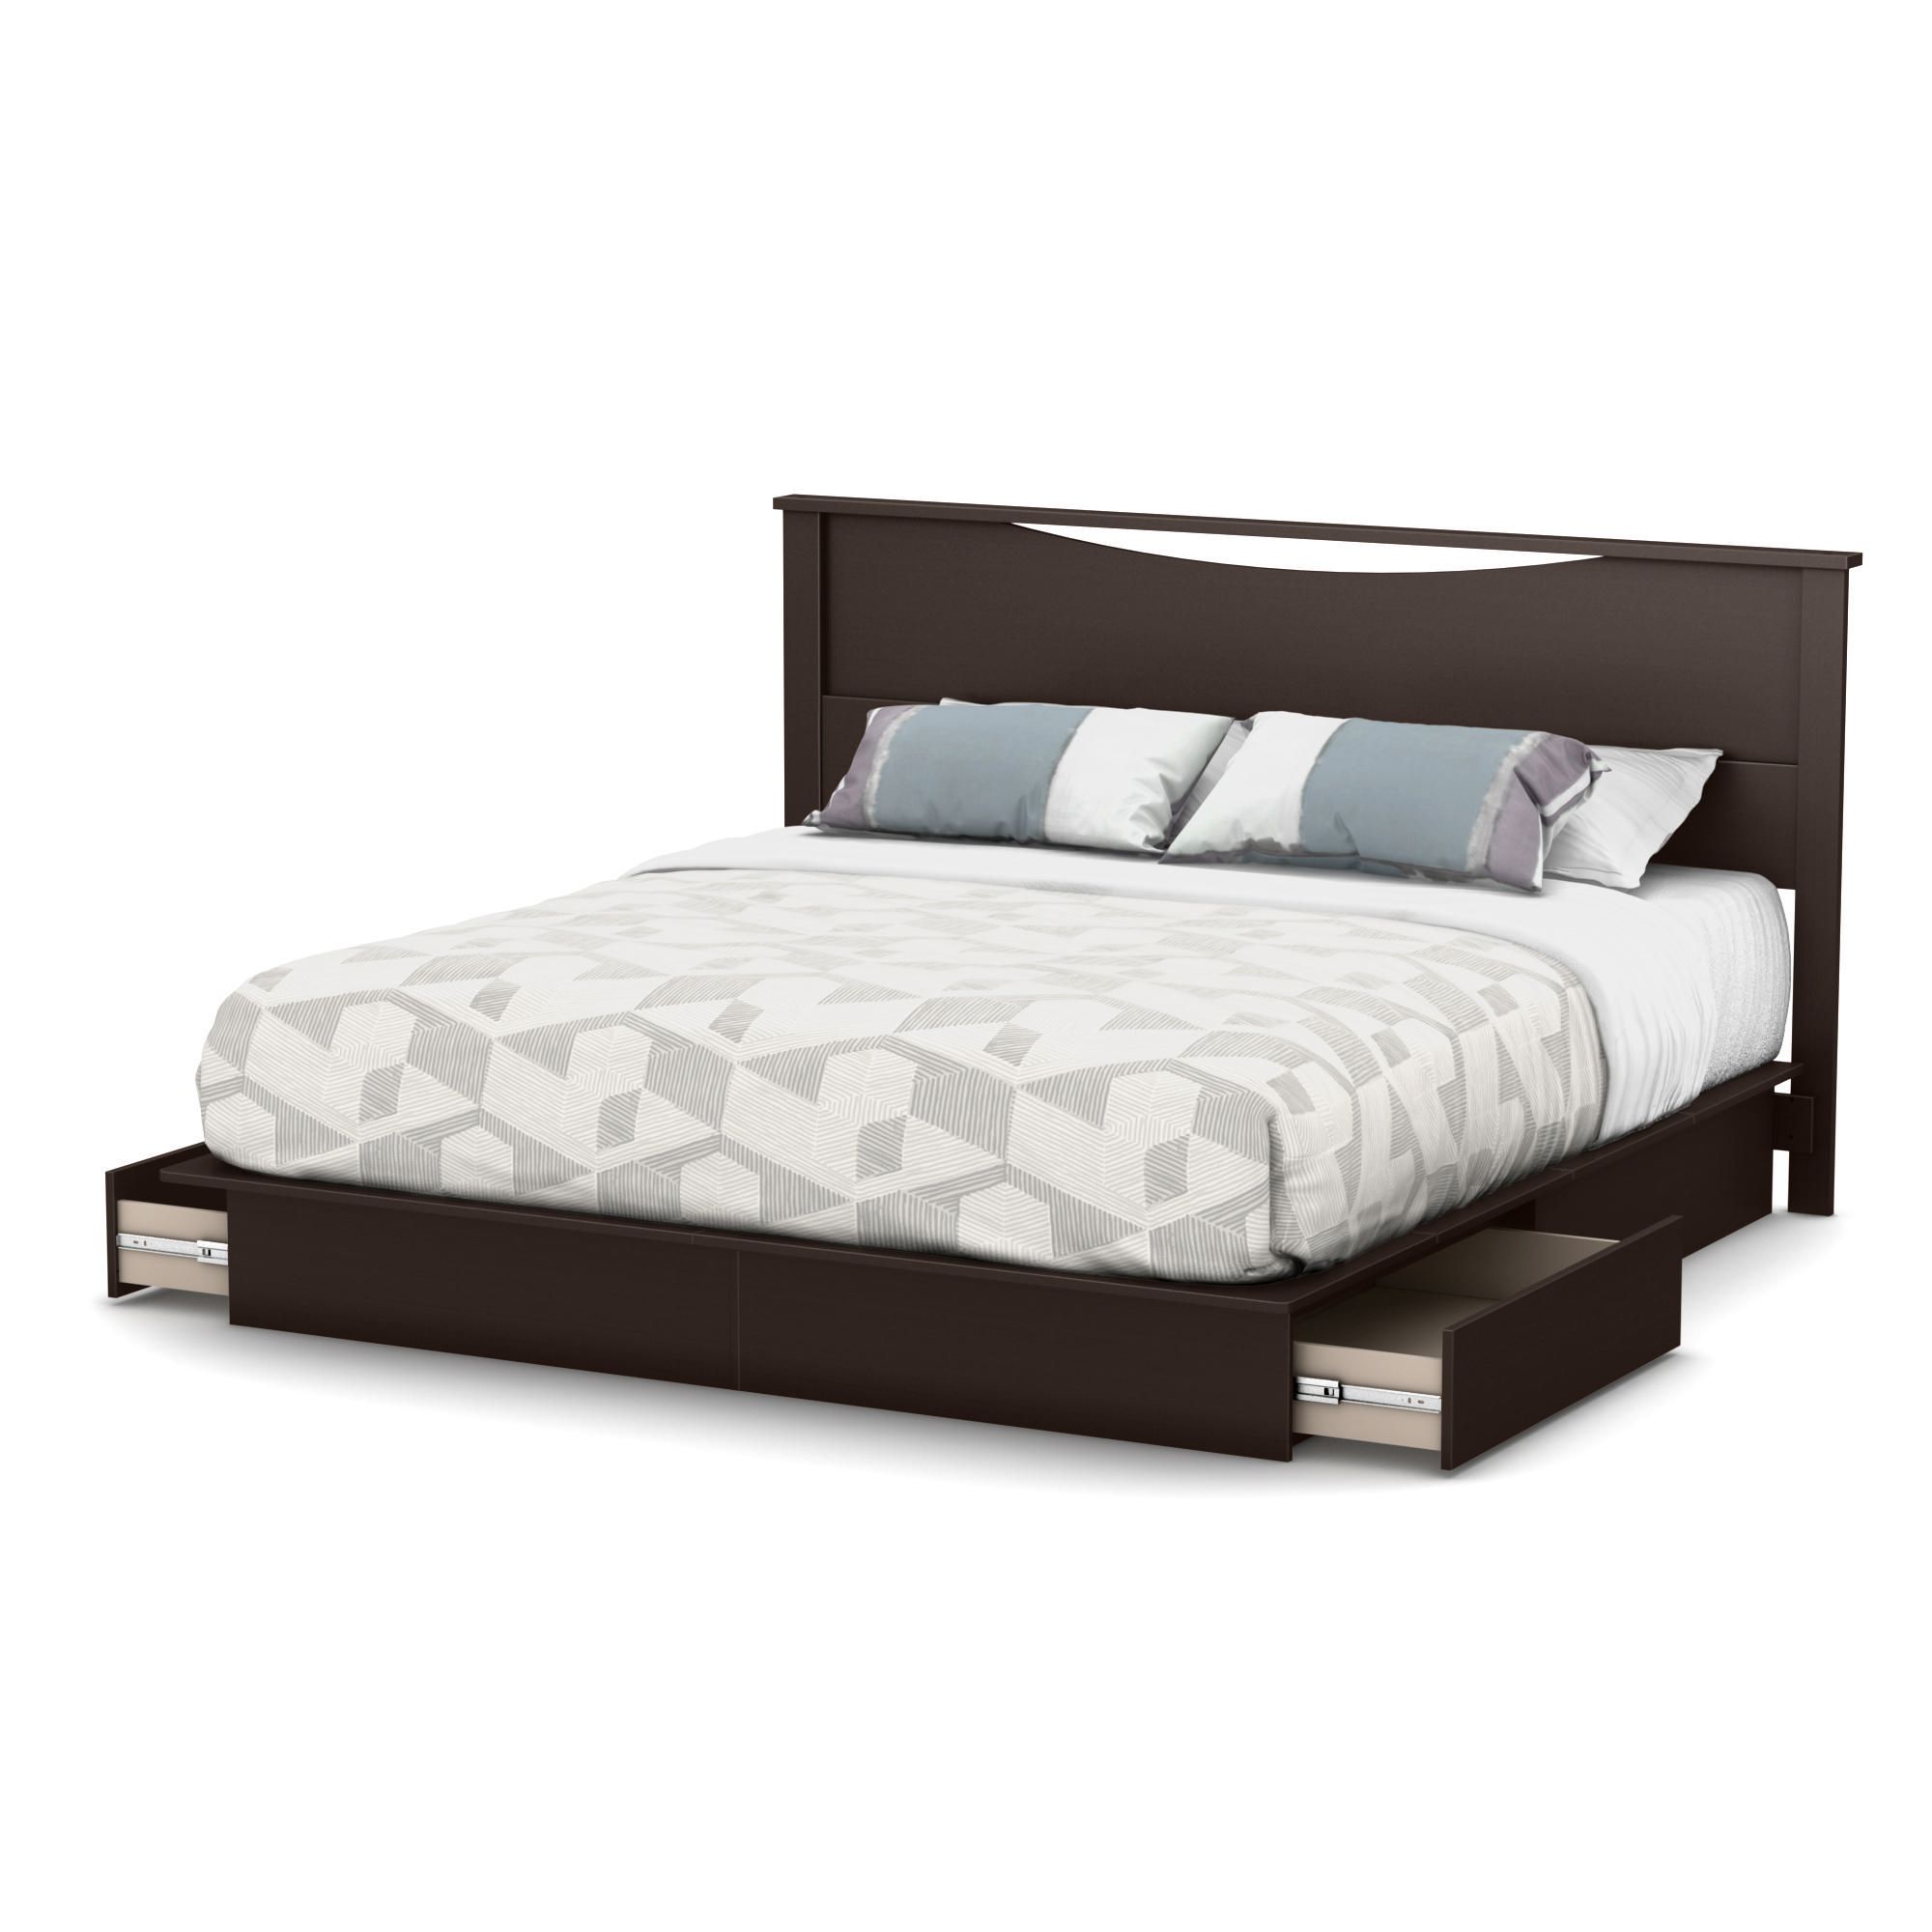 King Platform Bed 78 With Drawers, King Bed Frame With Storage Canada